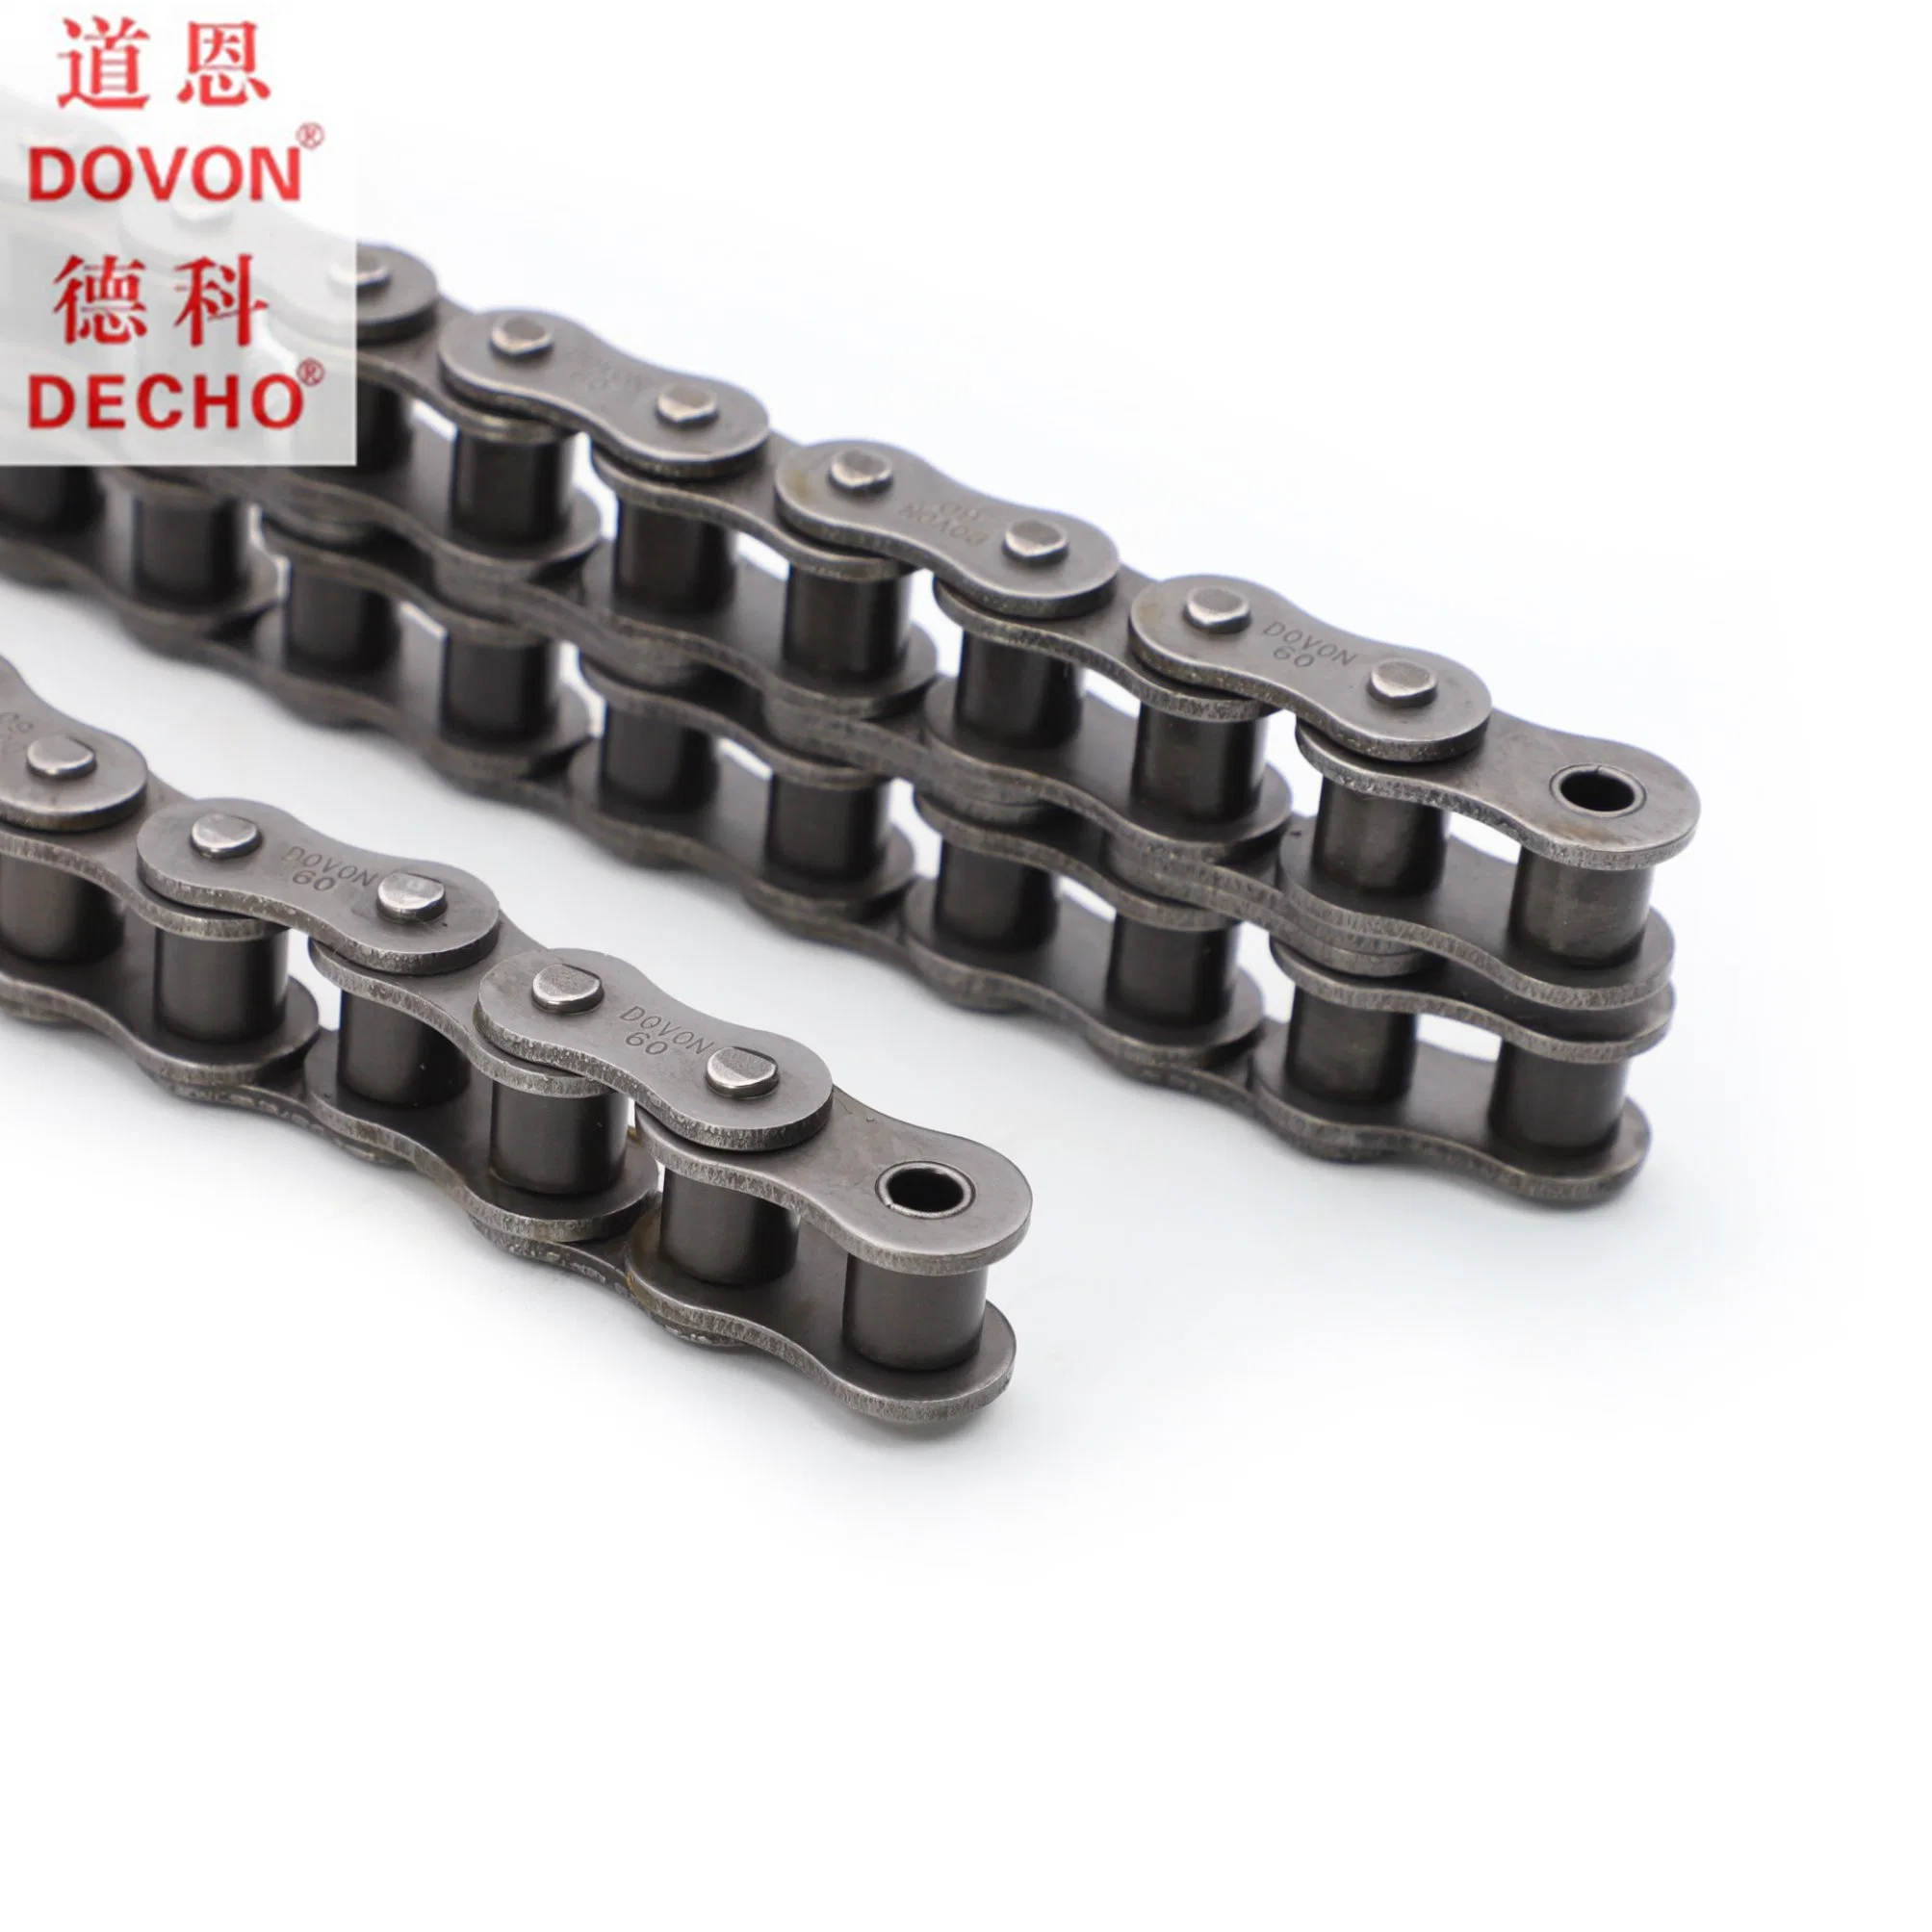 132 Link 420 Chain for Motorcycle Scooter ATV Dirt Bike